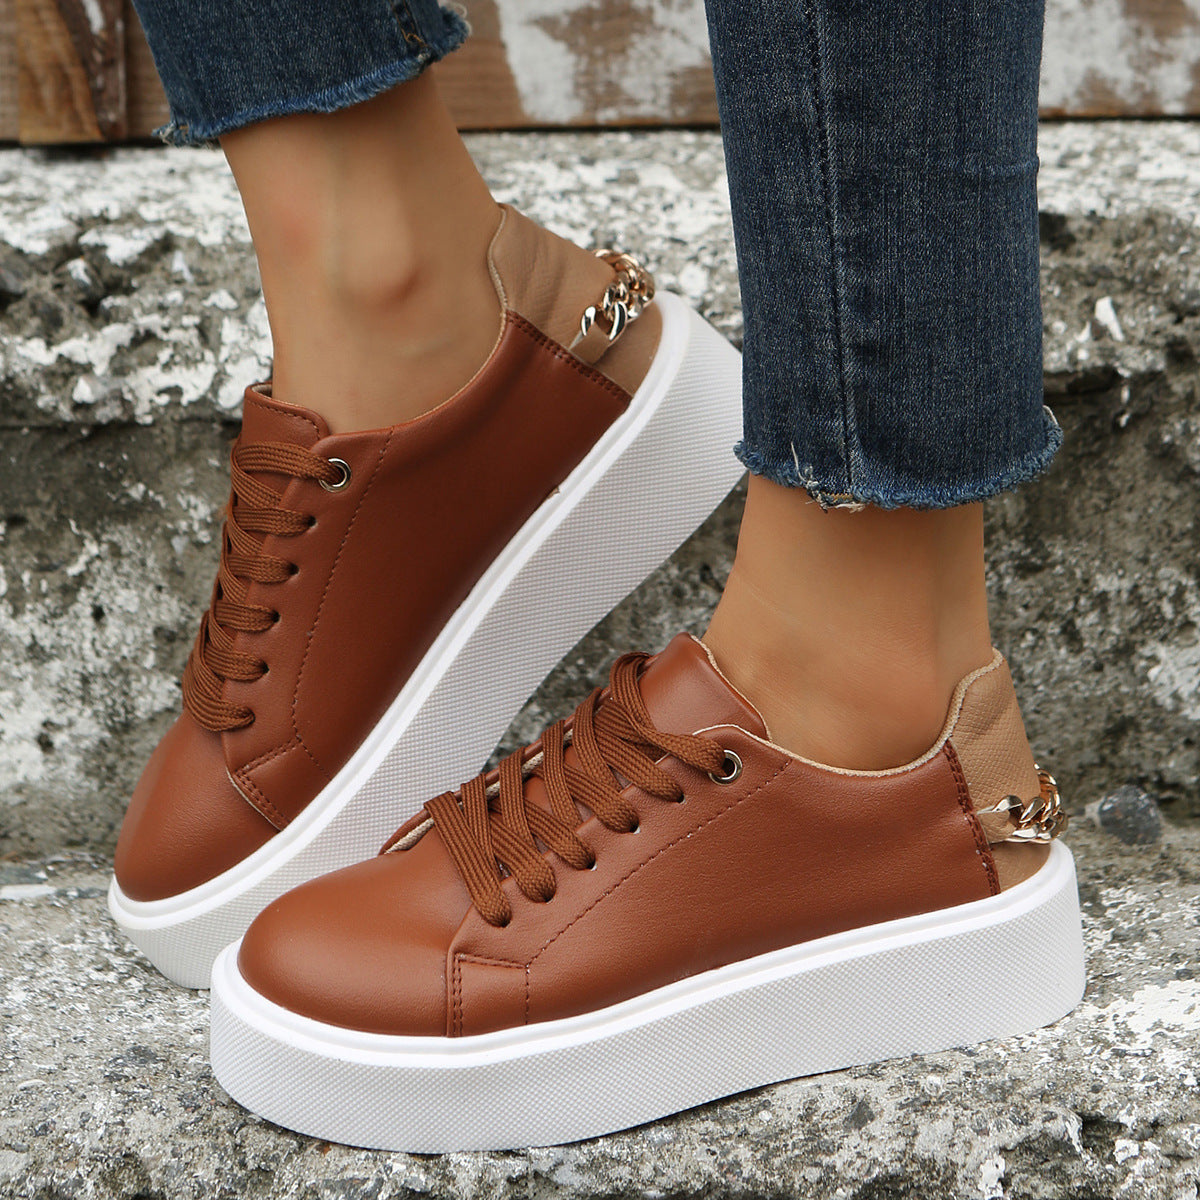 Round Head Cross Strap Thick Bottom Casual Low-top Sneakers Chain Pumps